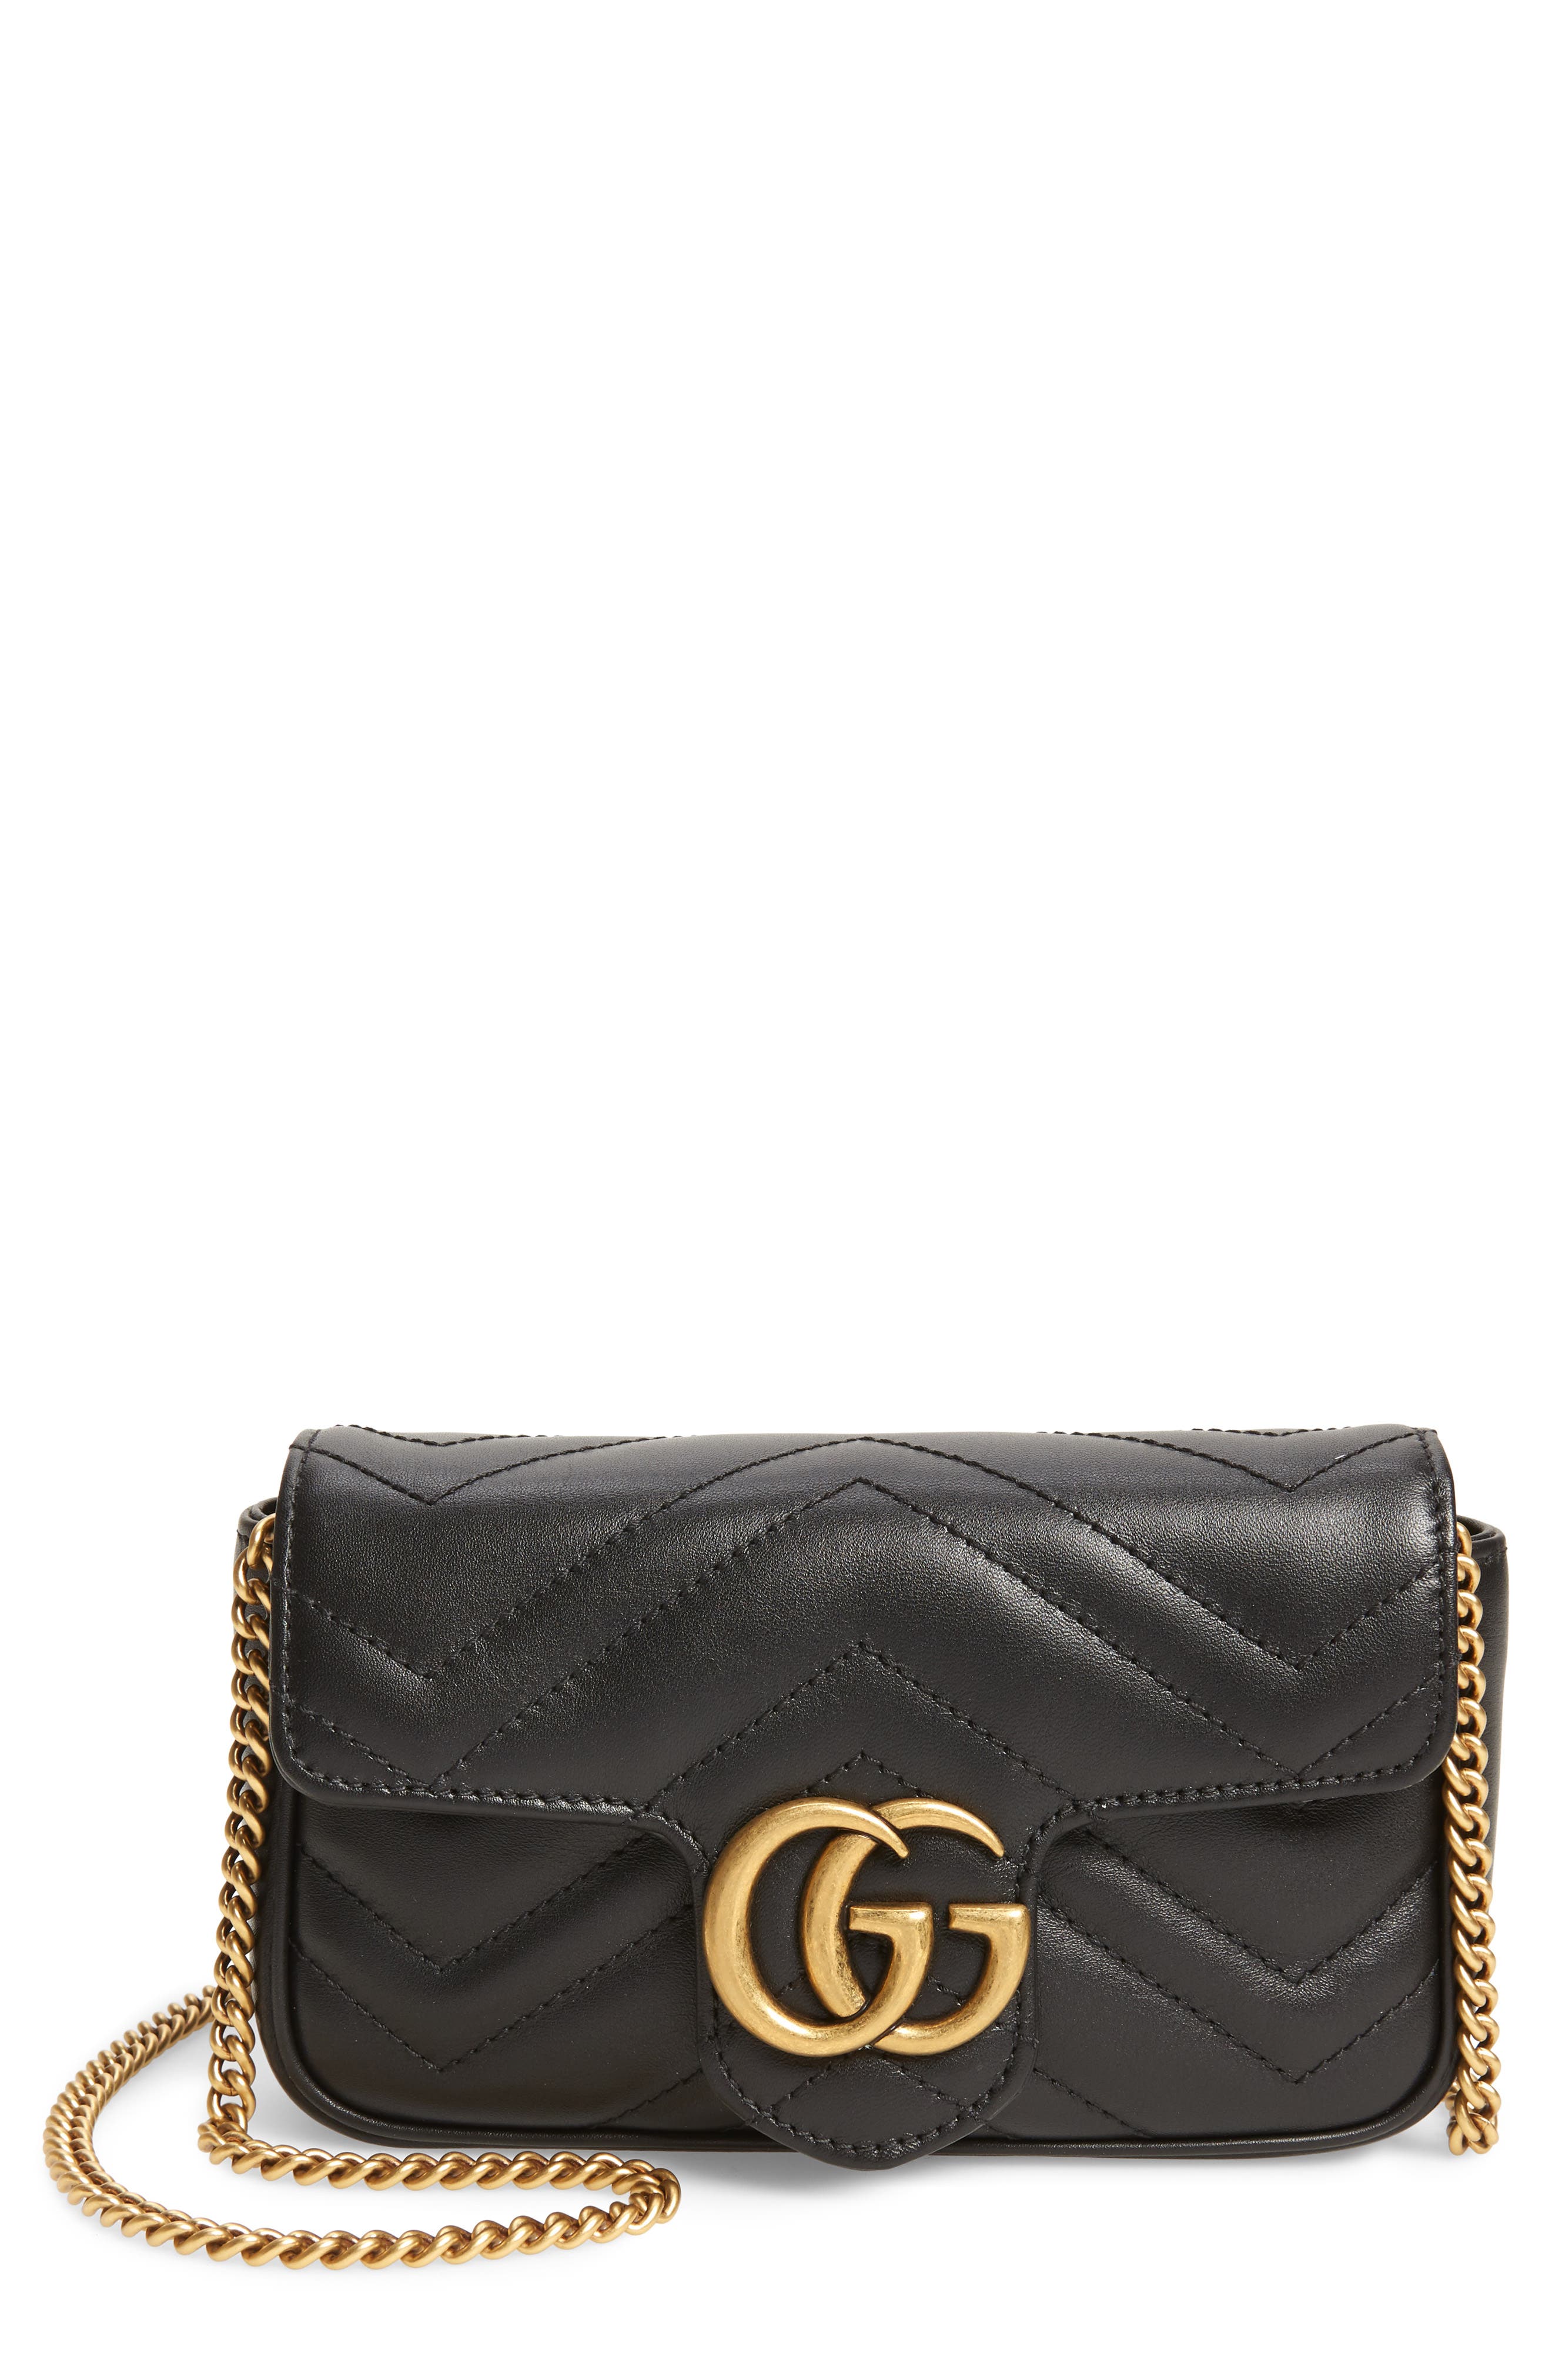 gucci bags sale nordstrom